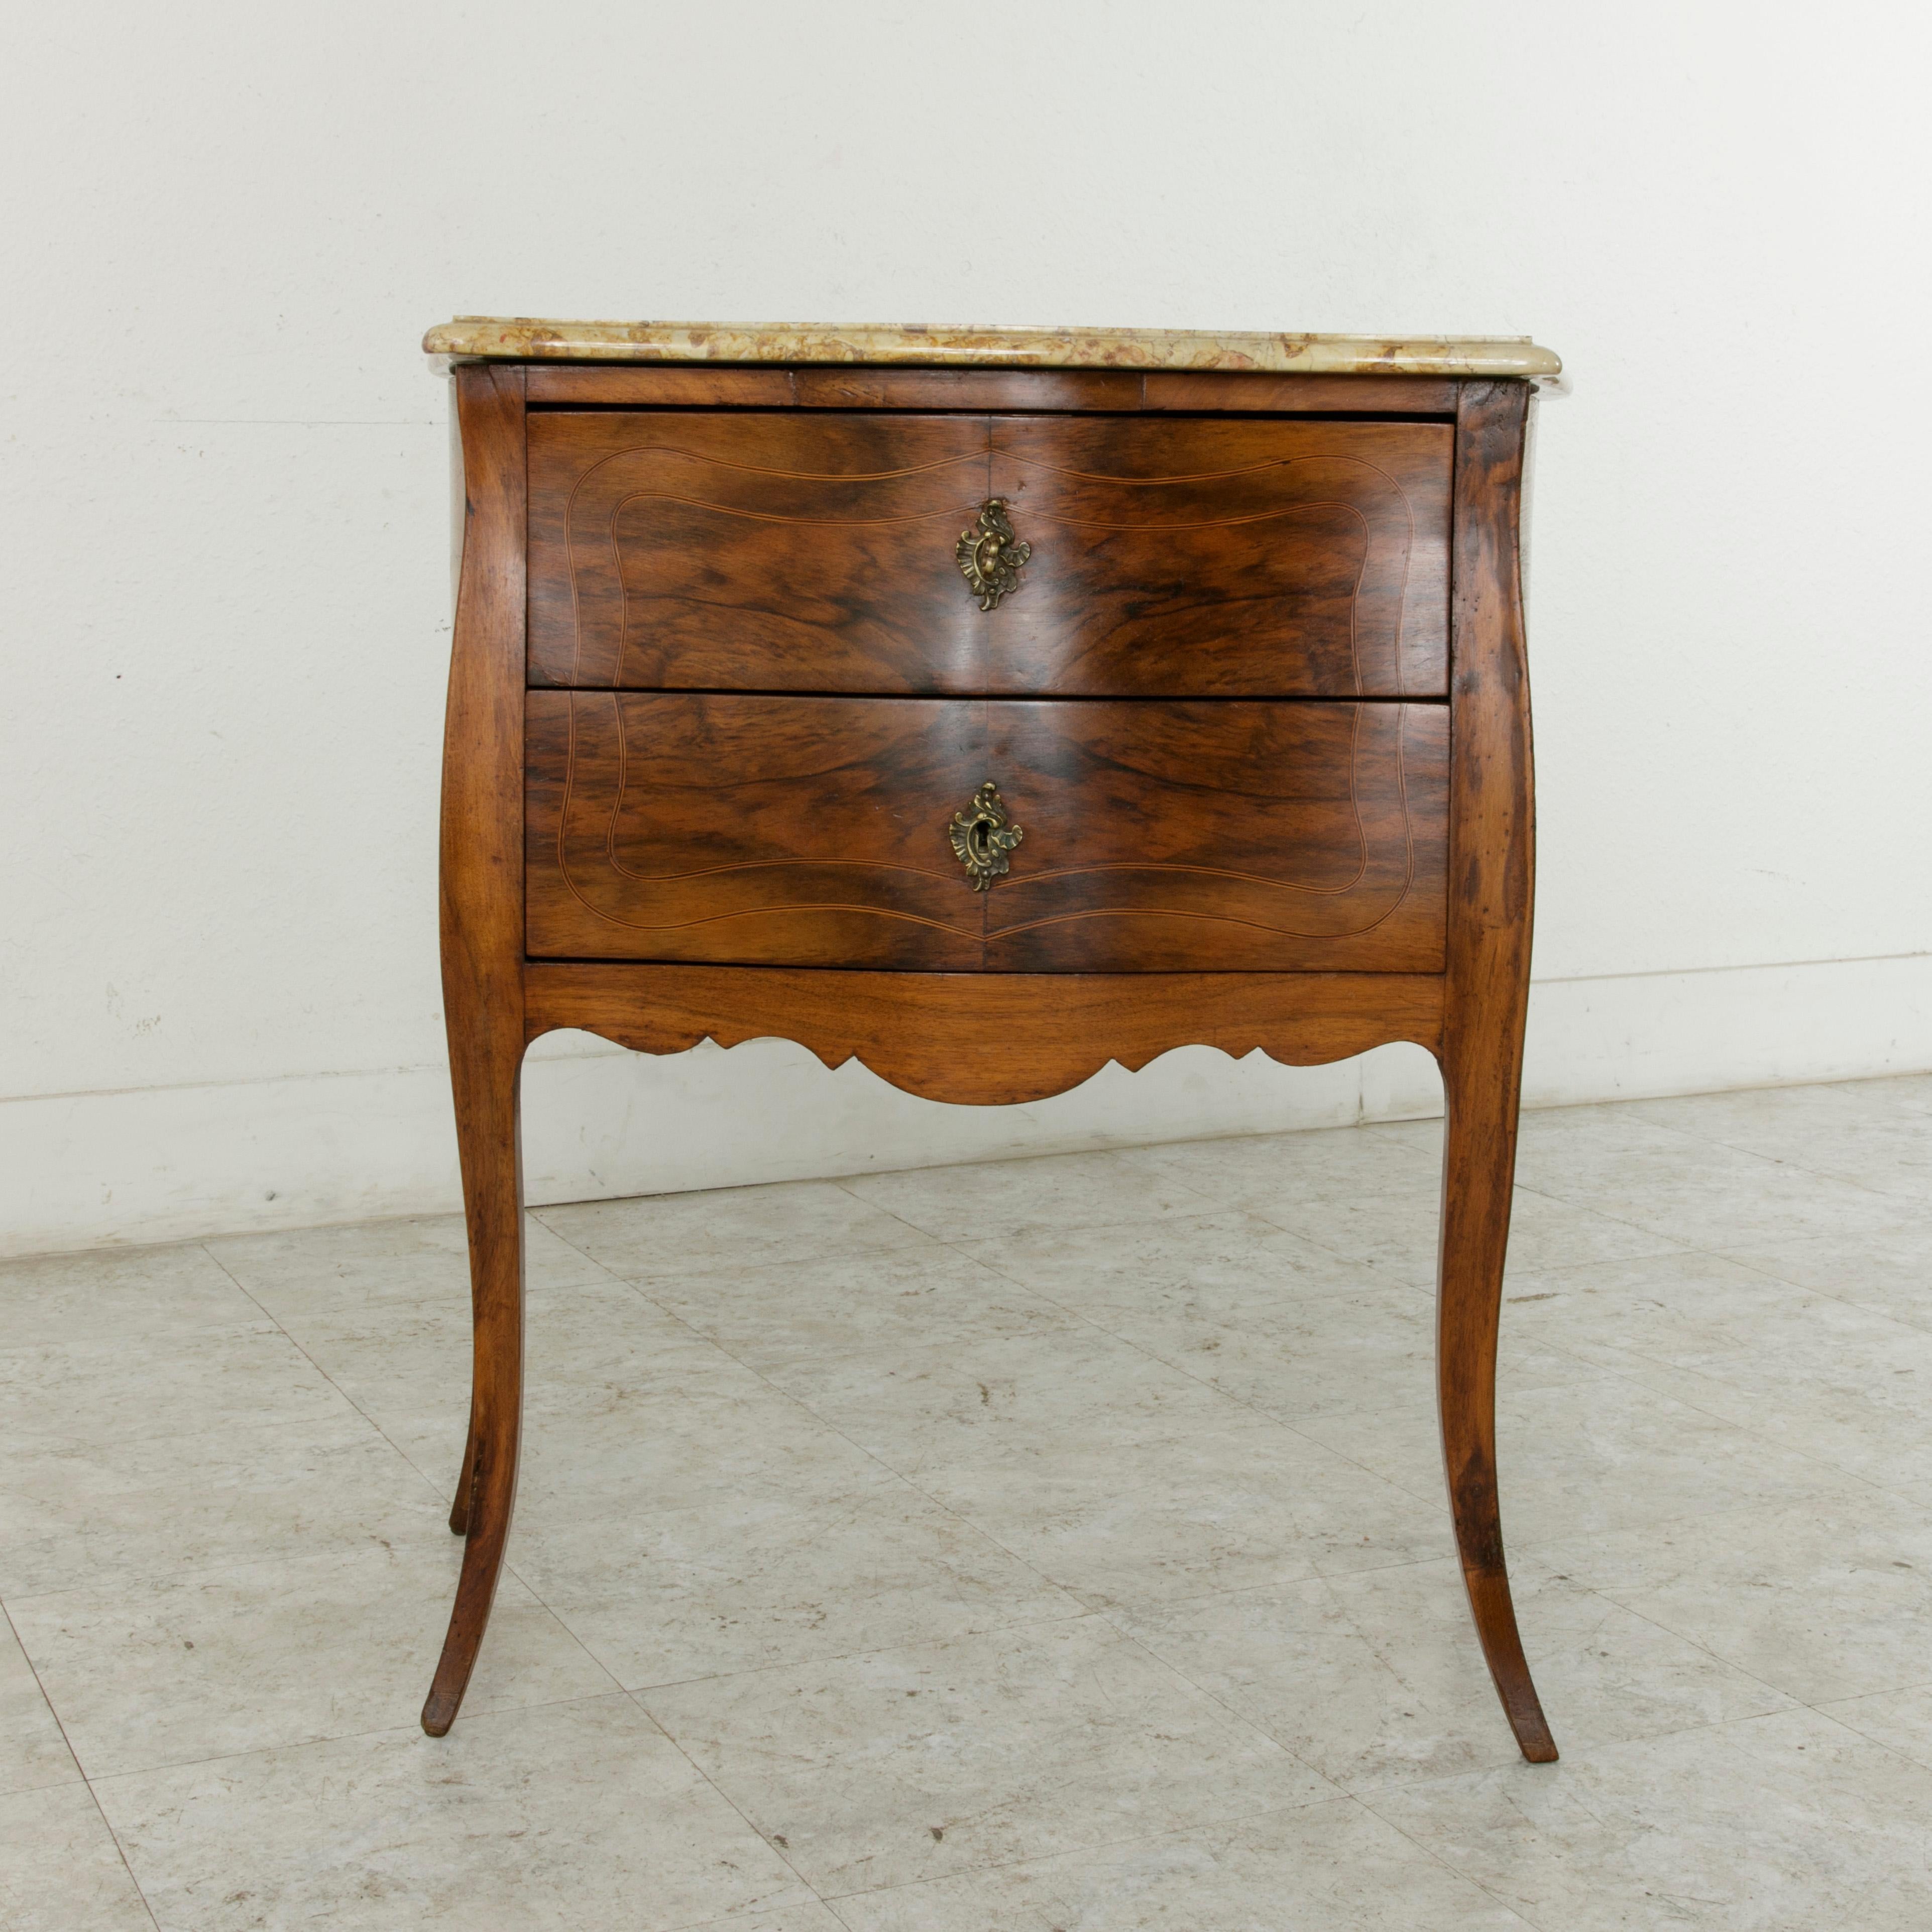 Ebonized Small 18th Century French Louis XV Style Marquetry Commode or Chest, Marble-Top